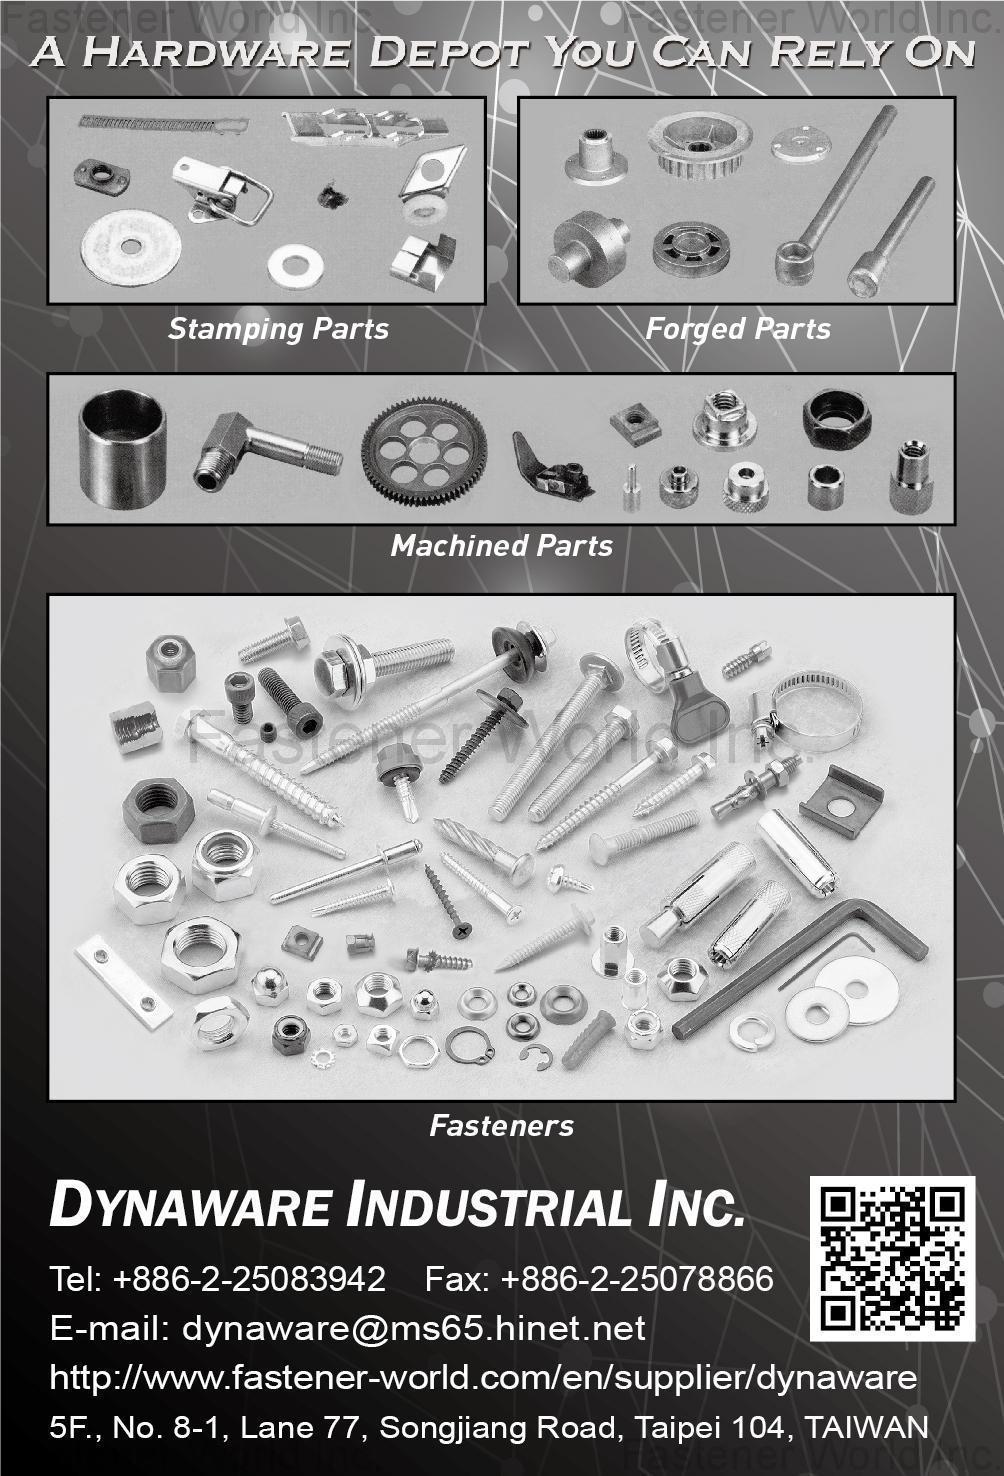 DYNAWARE INDUSTRIAL INC. , Stamping Parts, Forged Parts, Machined Parts, Fasteners , Stamped Parts